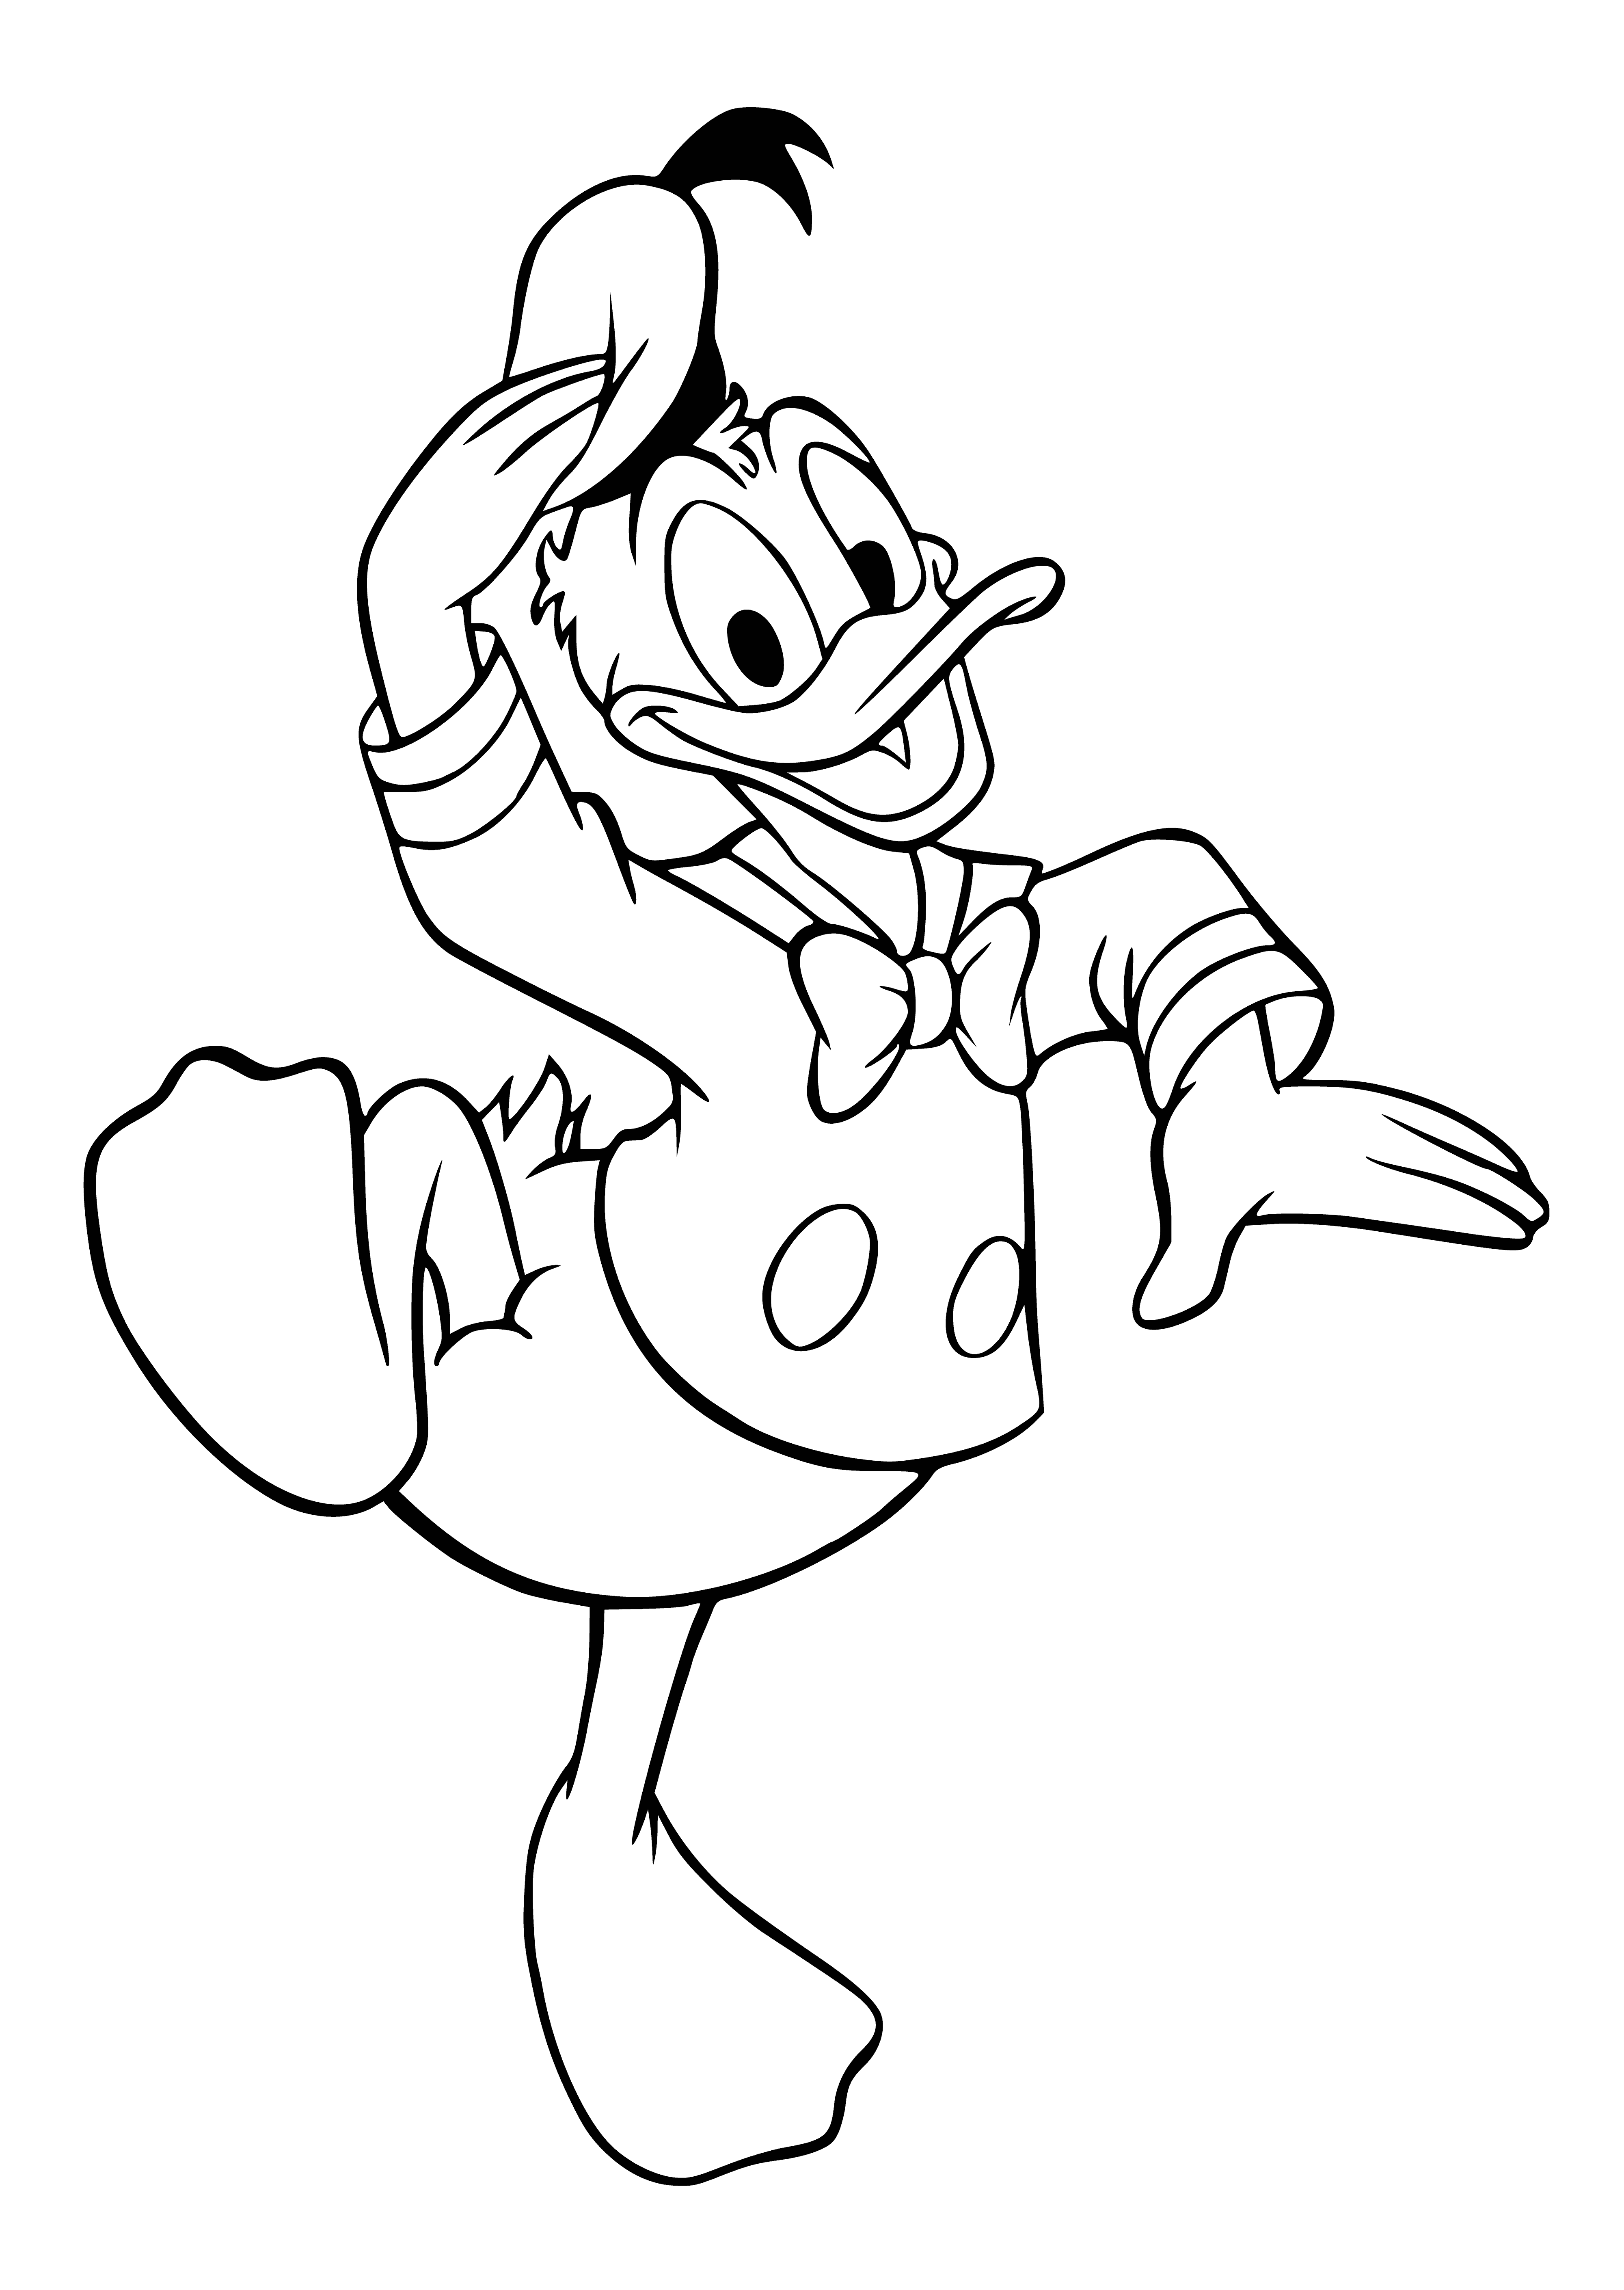 coloring page: Mickey and Donald smile and face the viewer, holding a box. Blue stars provide the backdrop for their coloring page with the greeting "Hi Donald!"